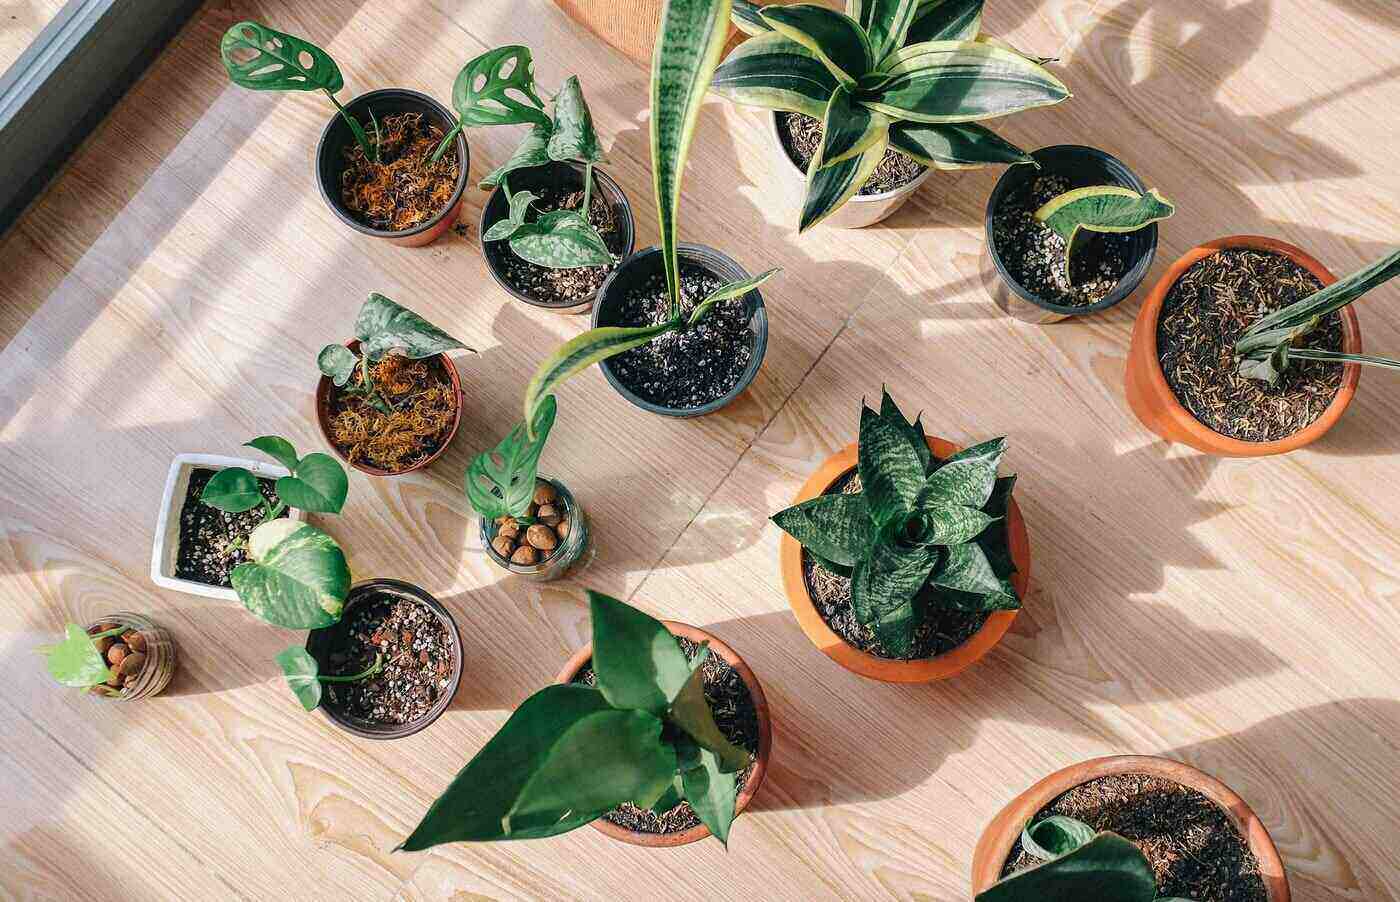 top view of house plants - 7 different house plants and how they benefit your home